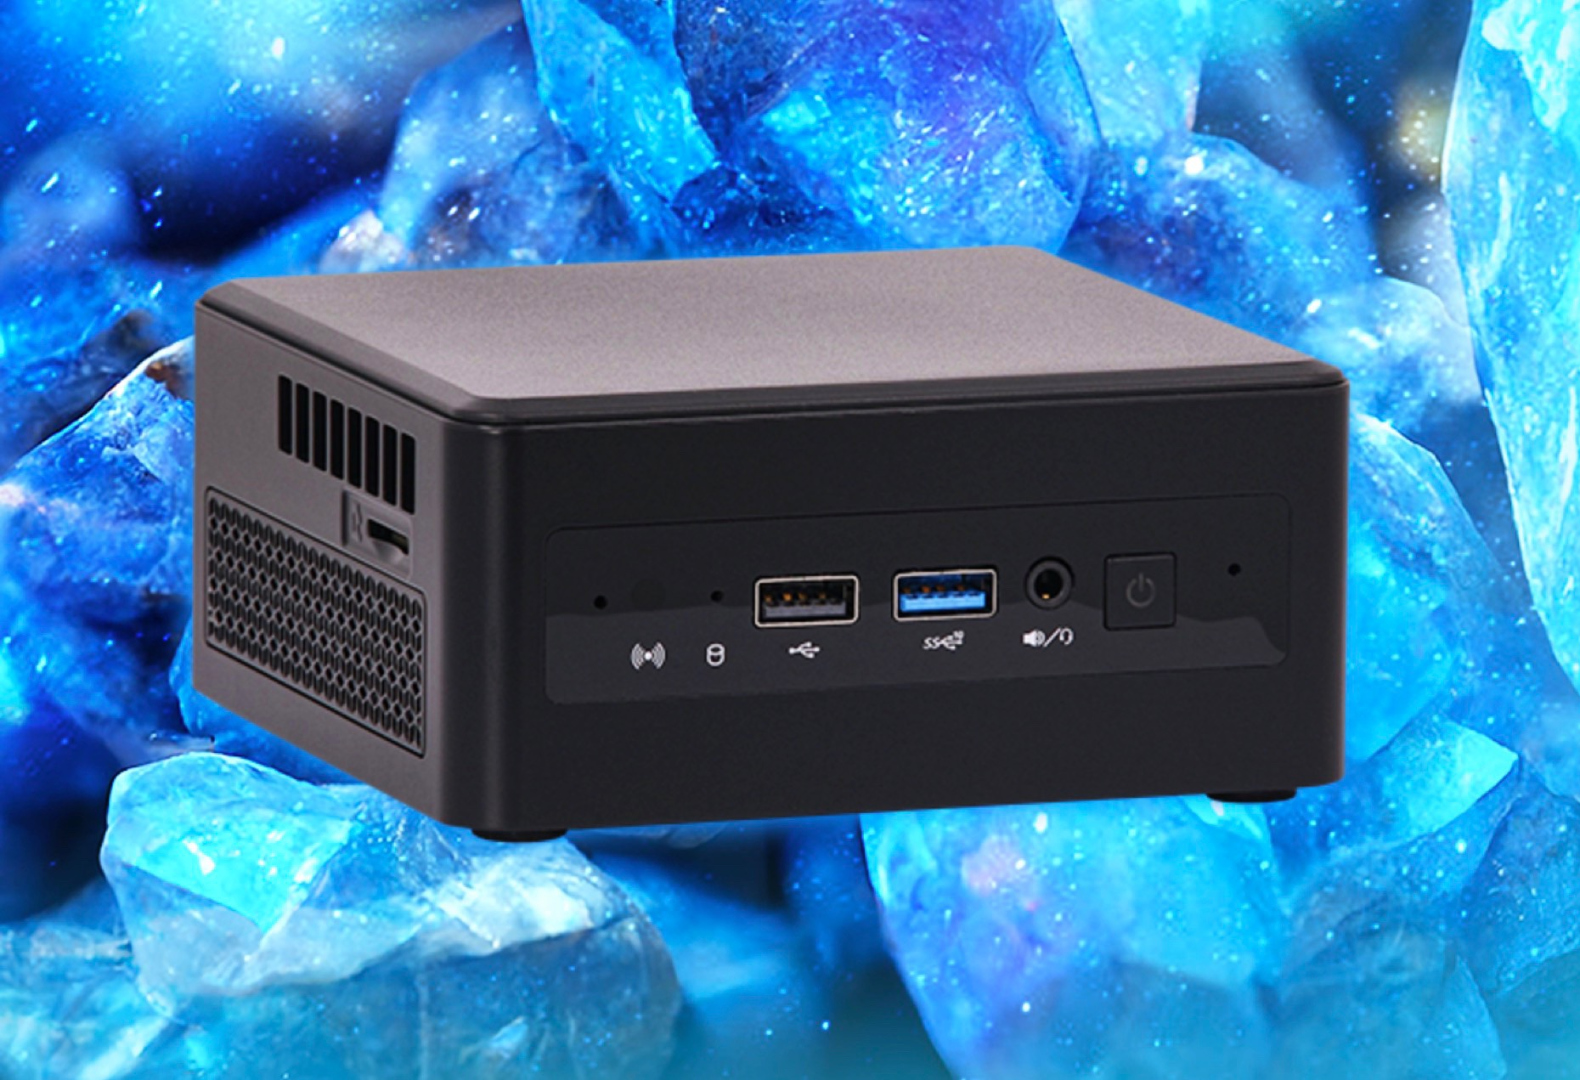 SimplyNUC joins AMD Ryzen 9 7940HS party with Moonstone mini-PC series -   News